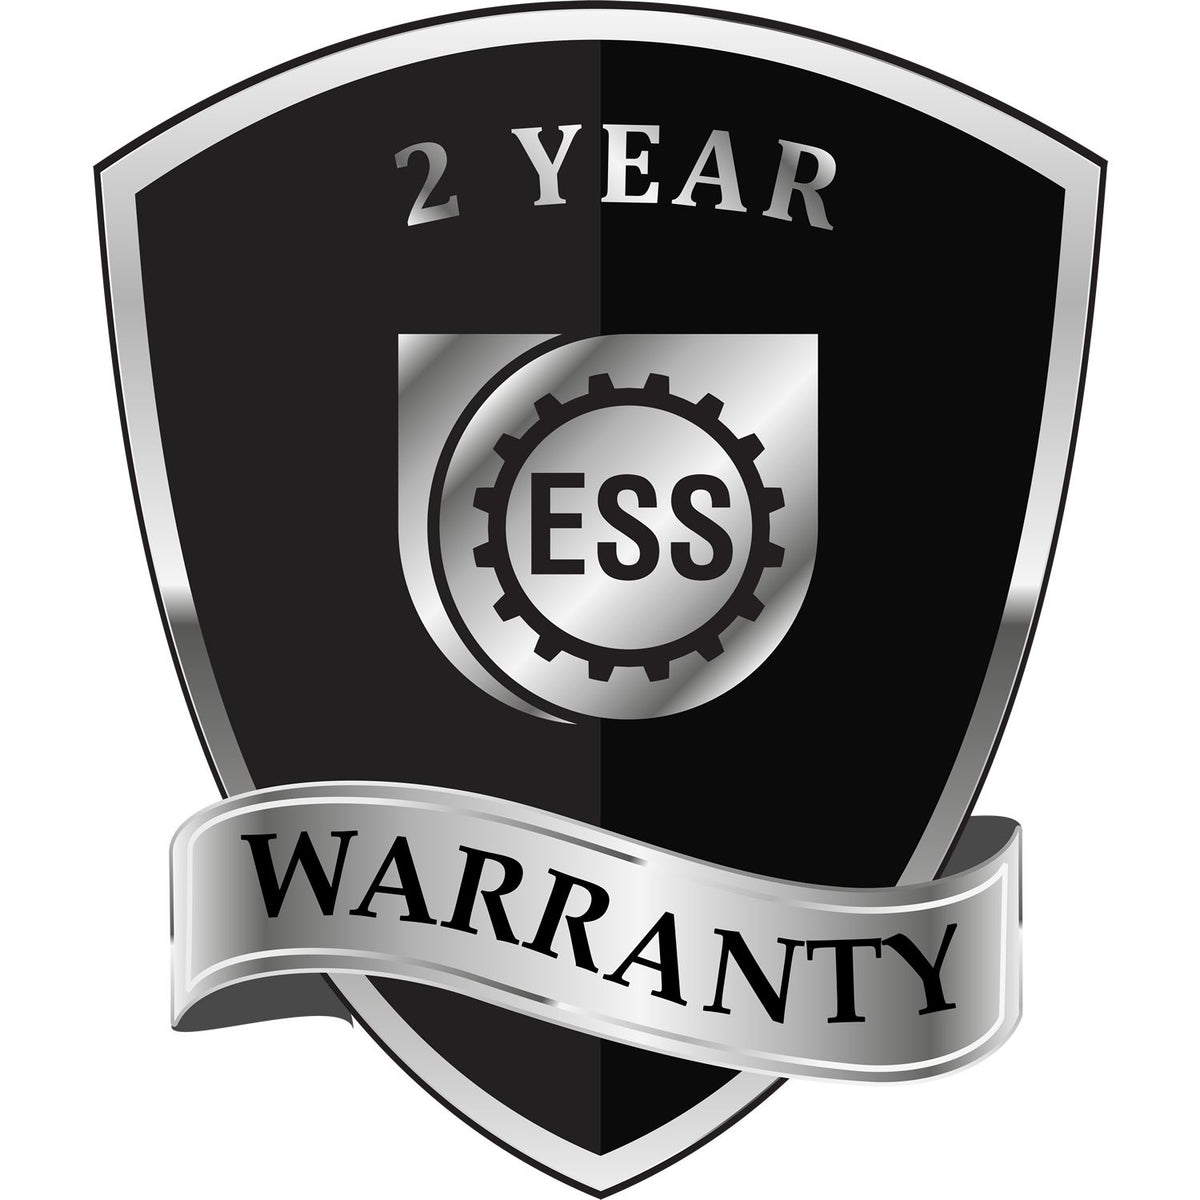 A badge or emblem showing a warranty icon for the Heavy Duty Cast Iron Missouri Engineer Seal Embosser